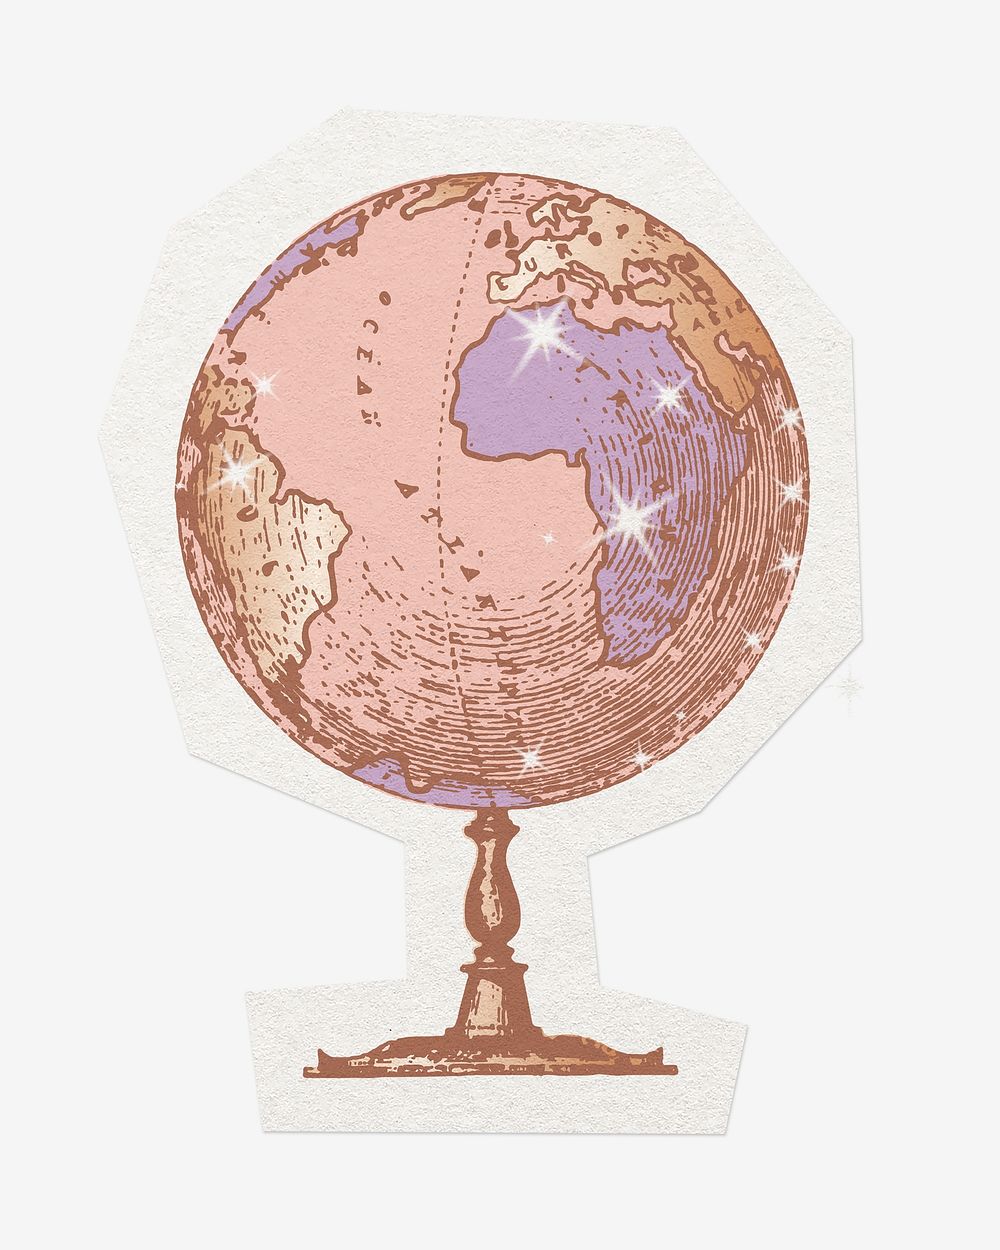 Aesthetic globe, cut out paper design, off white graphic